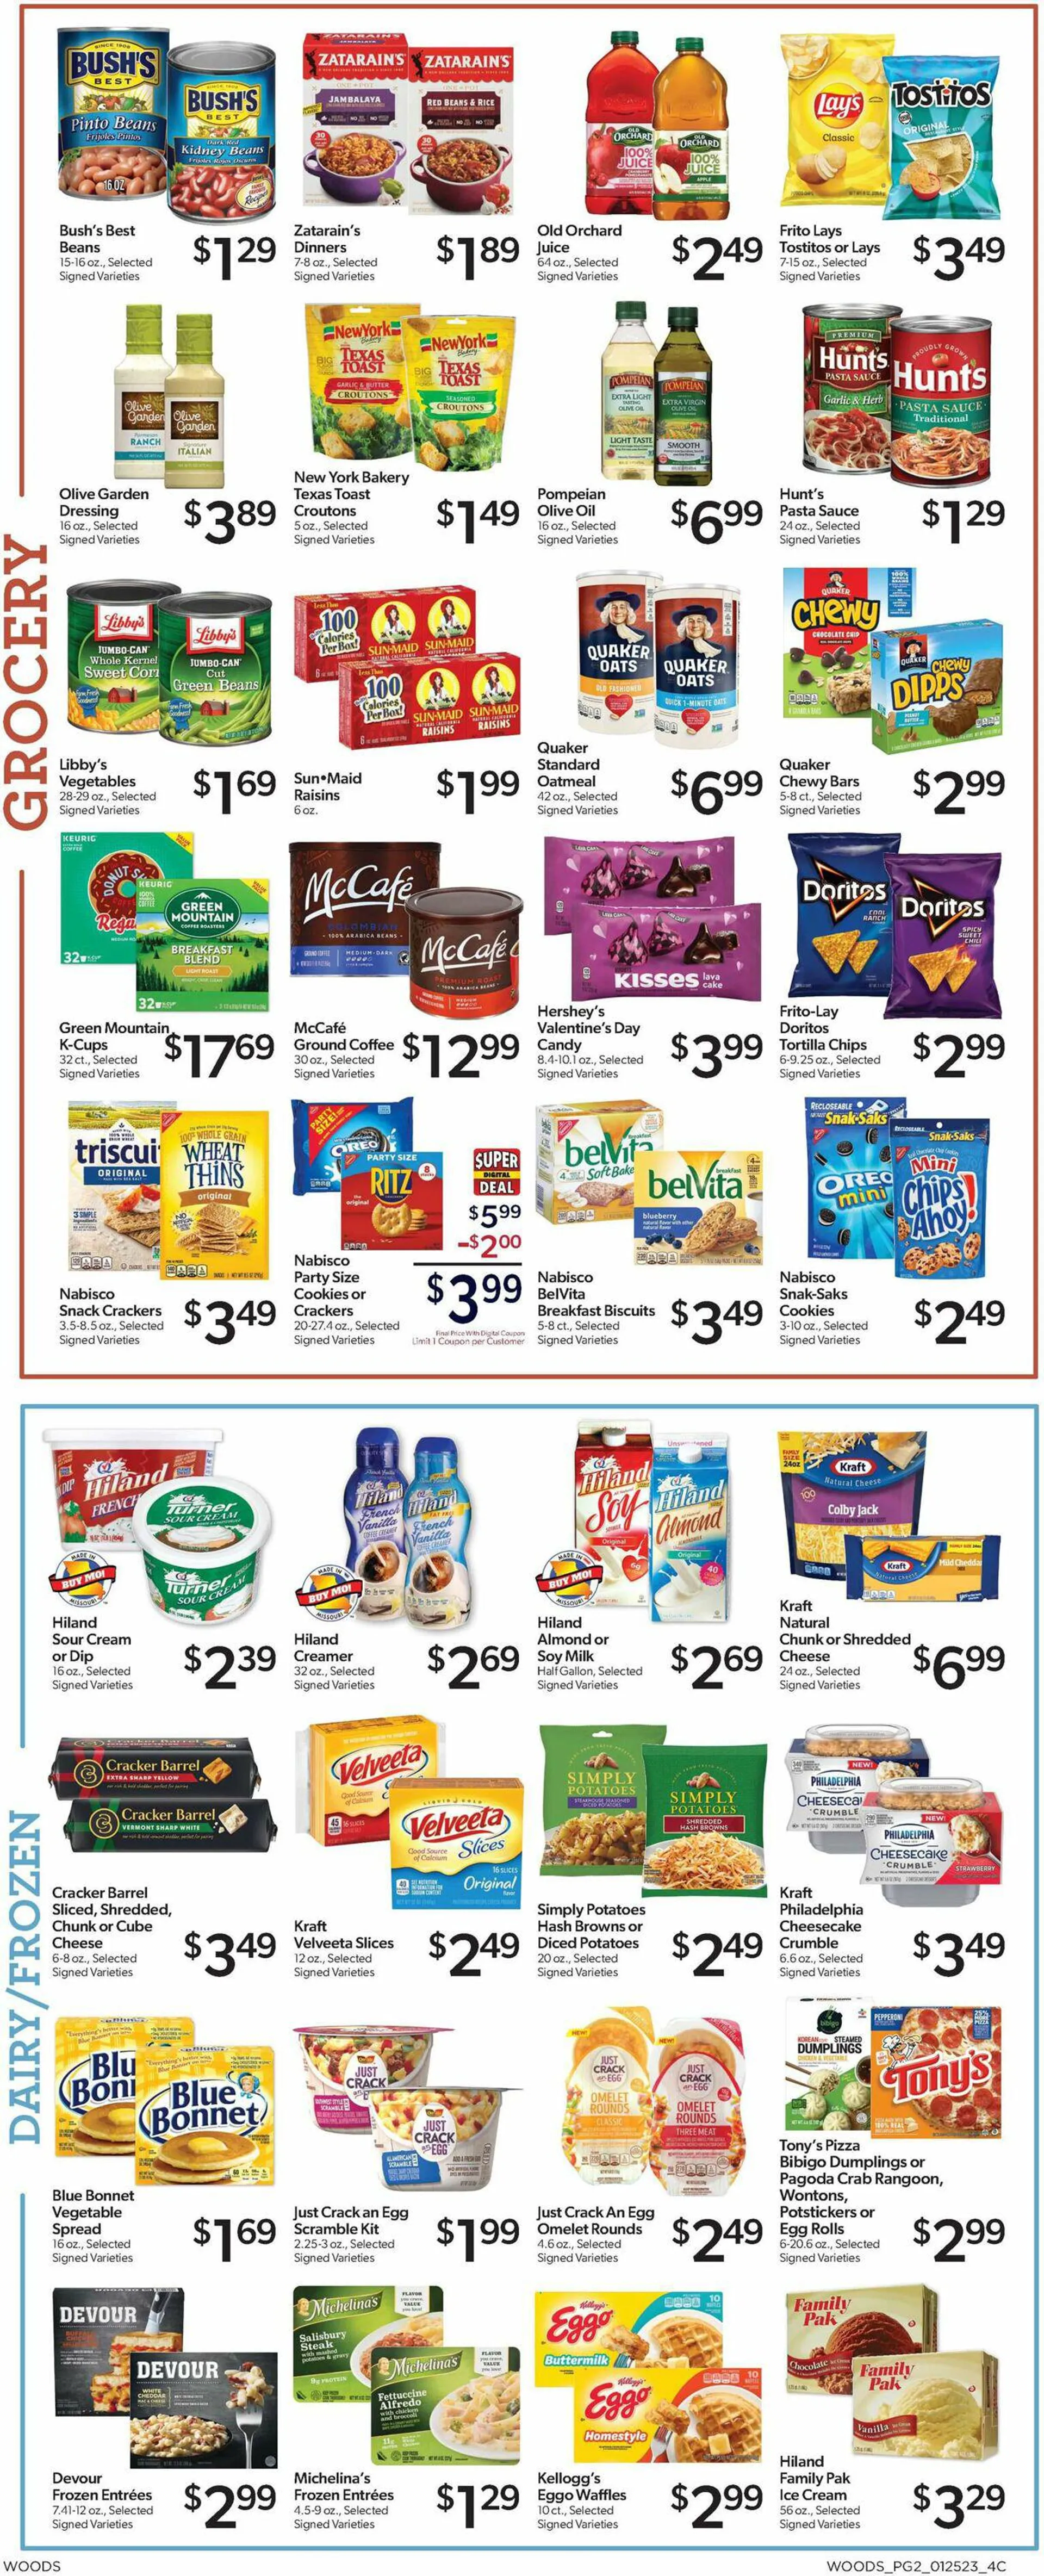 Woods Supermarket Current weekly ad - 2